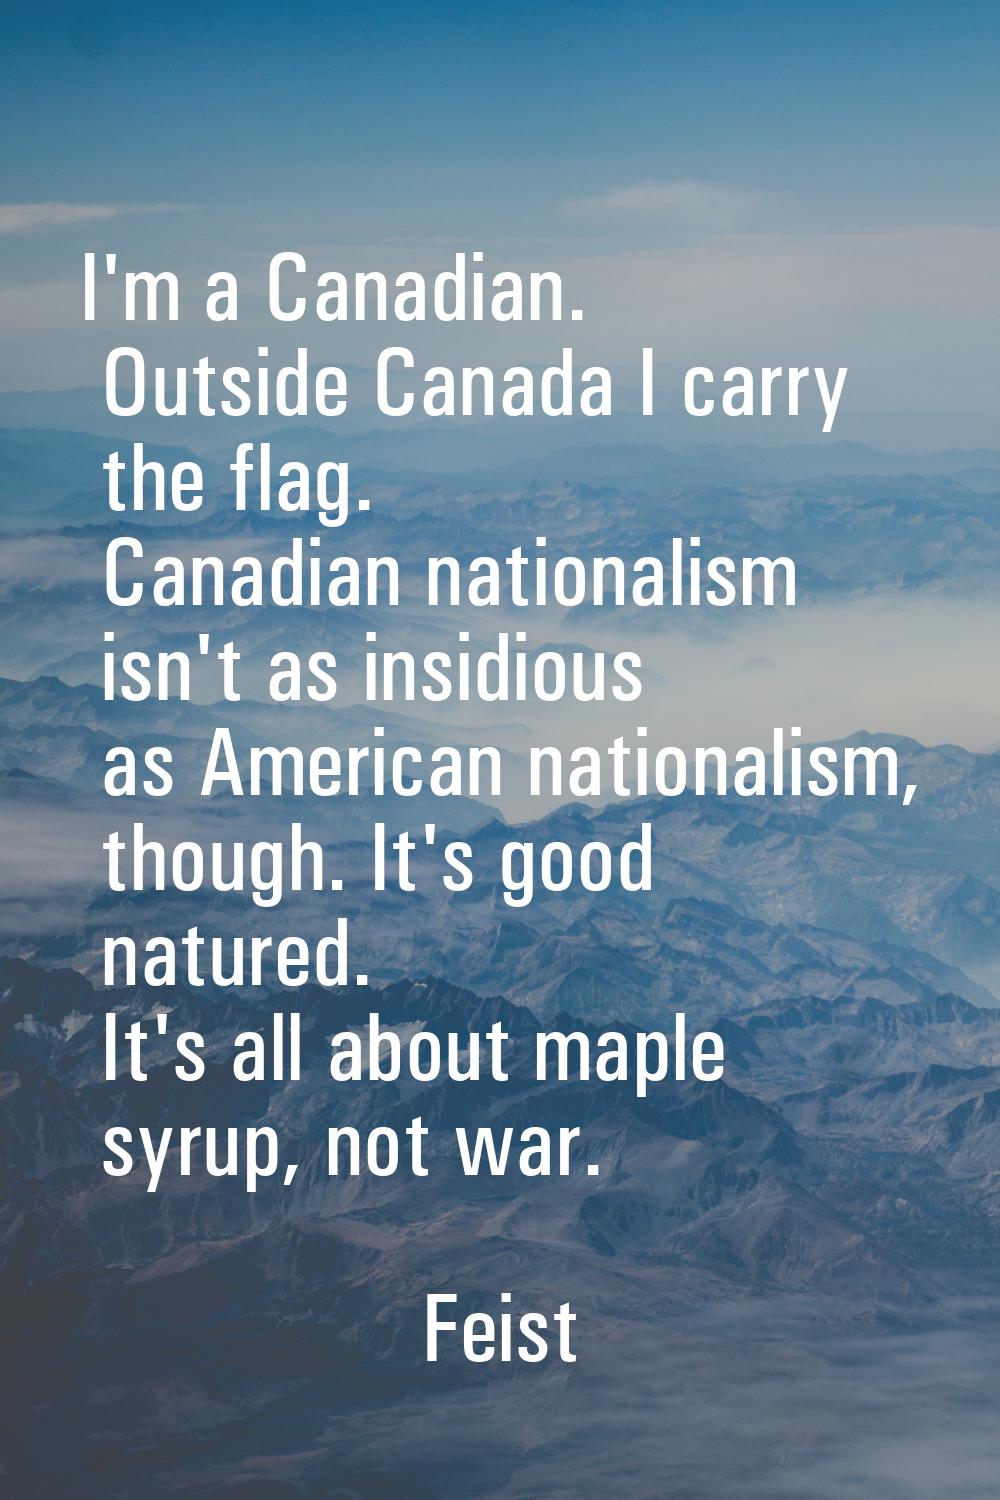 I'm a Canadian. Outside Canada I carry the flag. Canadian nationalism isn't as insidious as America